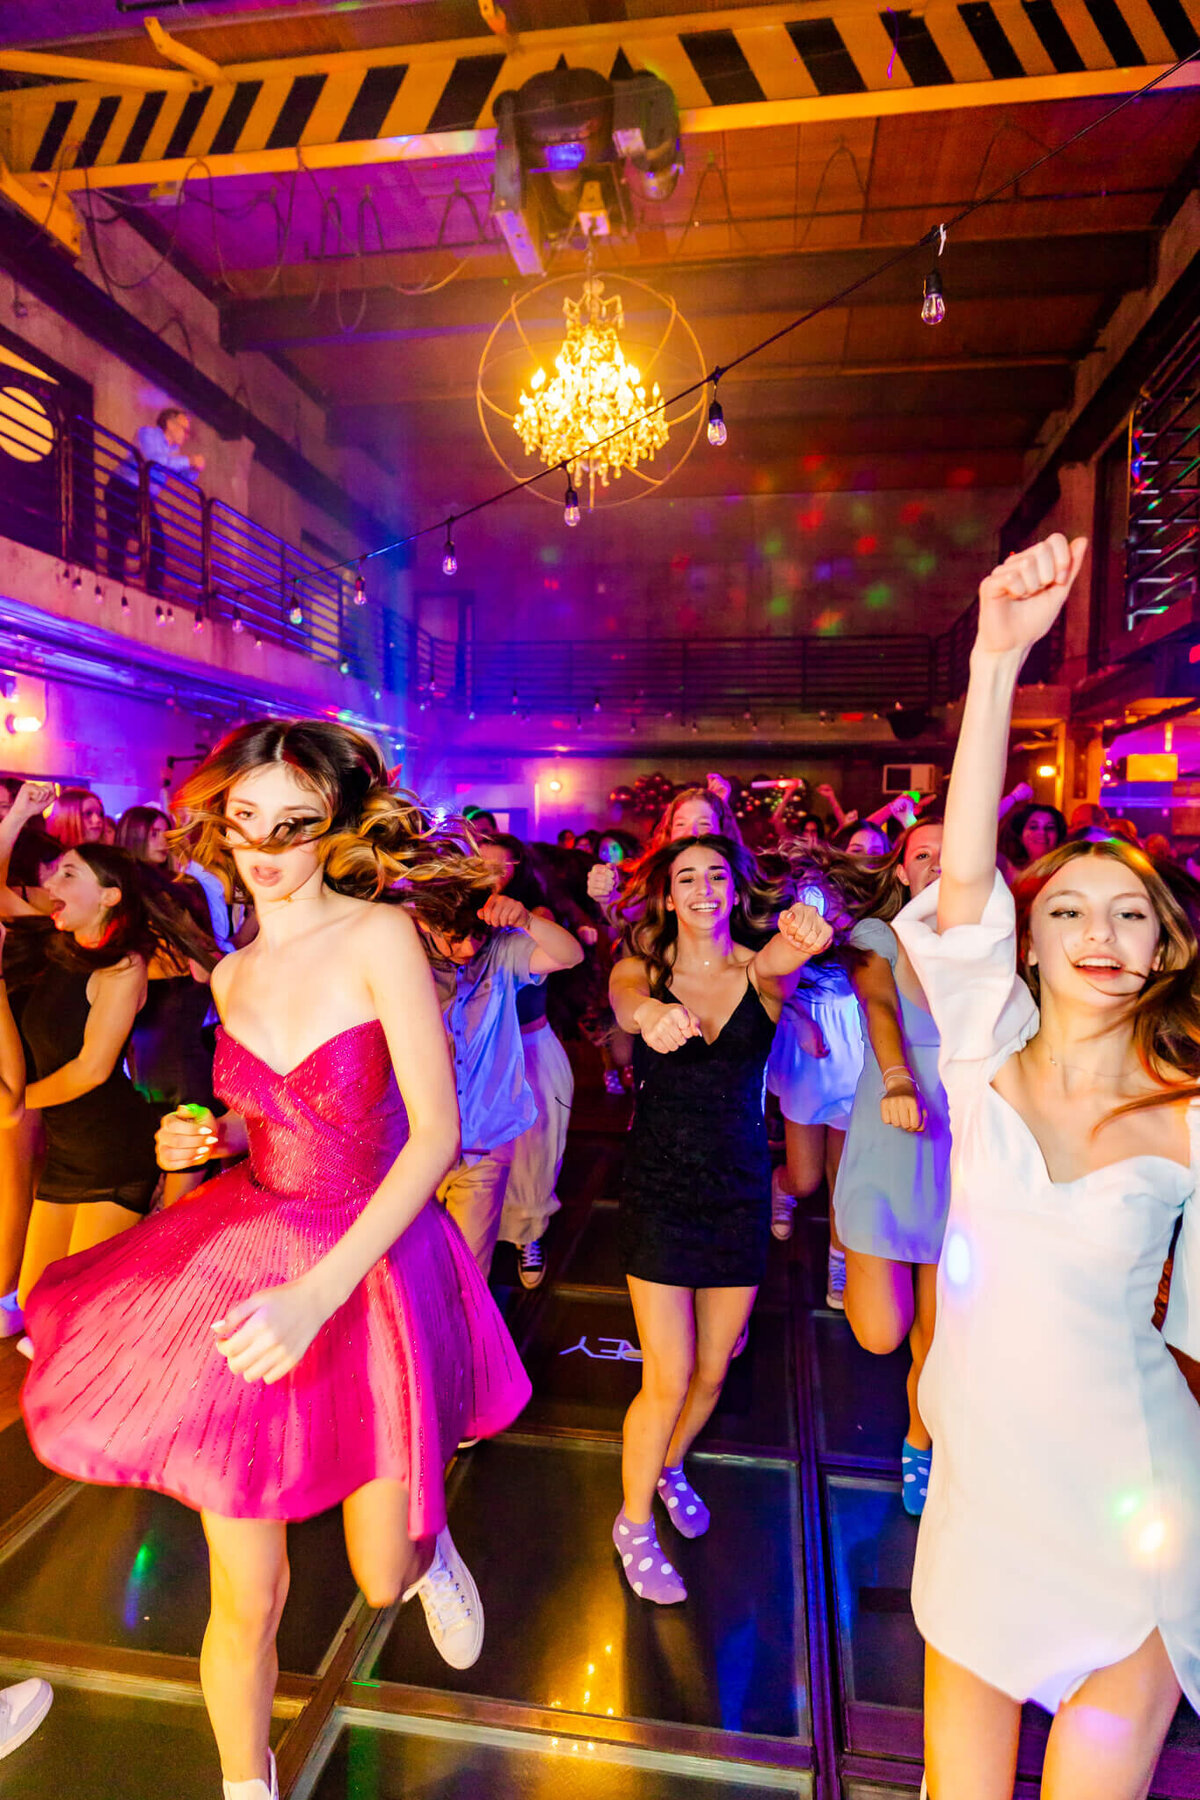 A group of teen girls dance on the dance floor in pink and white dresses